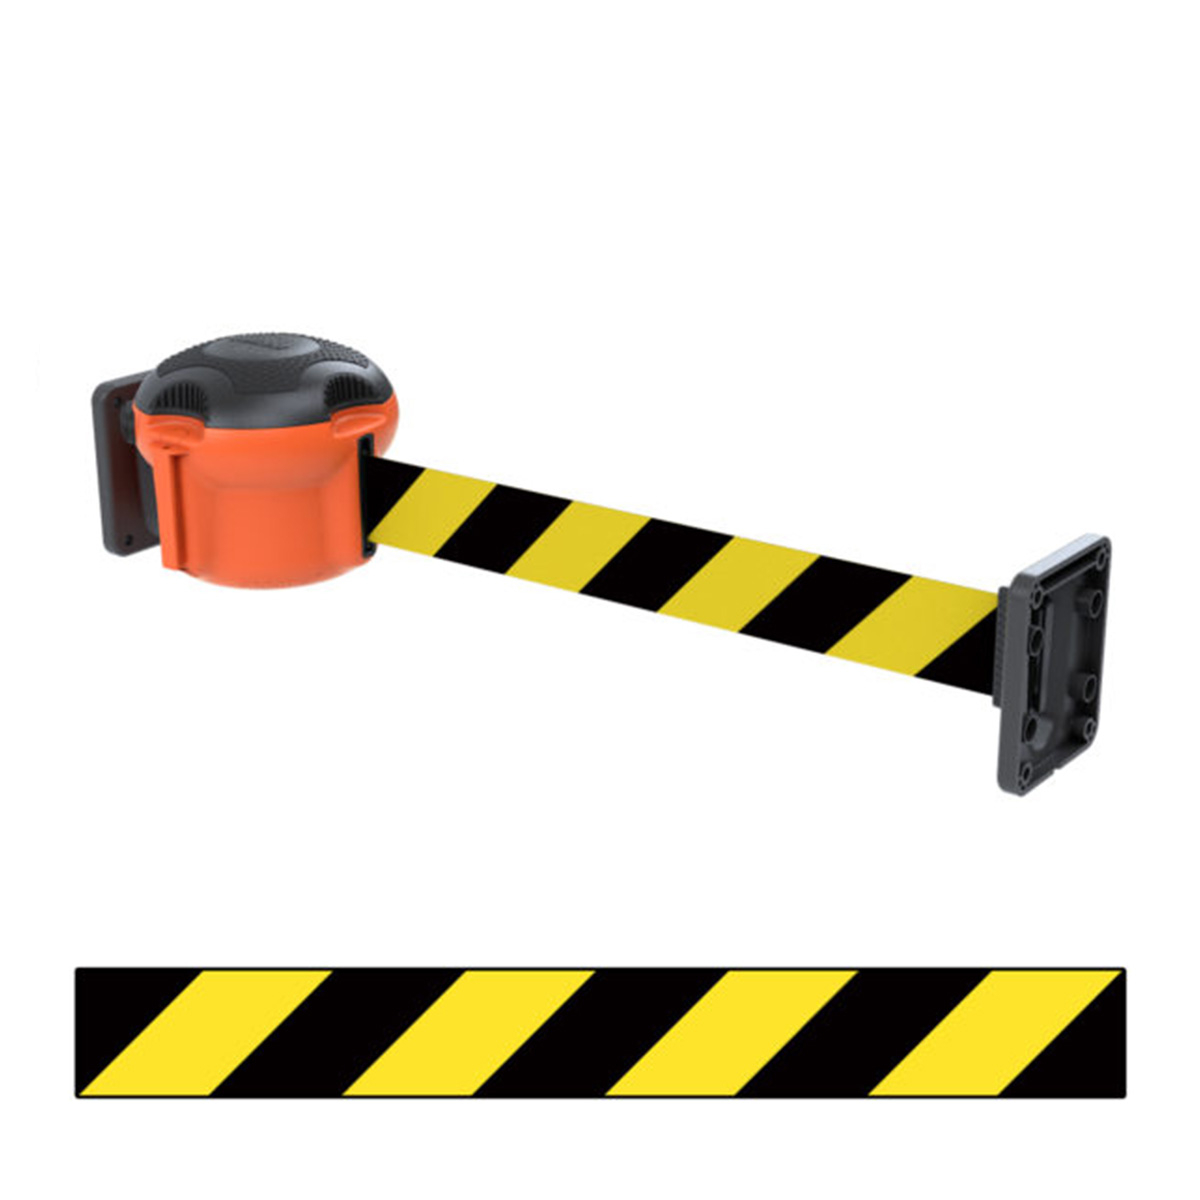 Skipper™ Wall-Mounted Retractable Barrier Kit. Affordable & Easy To Use. 9m Long Hi Vis Webbing Belt + 2x Receiver Clips. XL Displays Approved UK Distributor. 